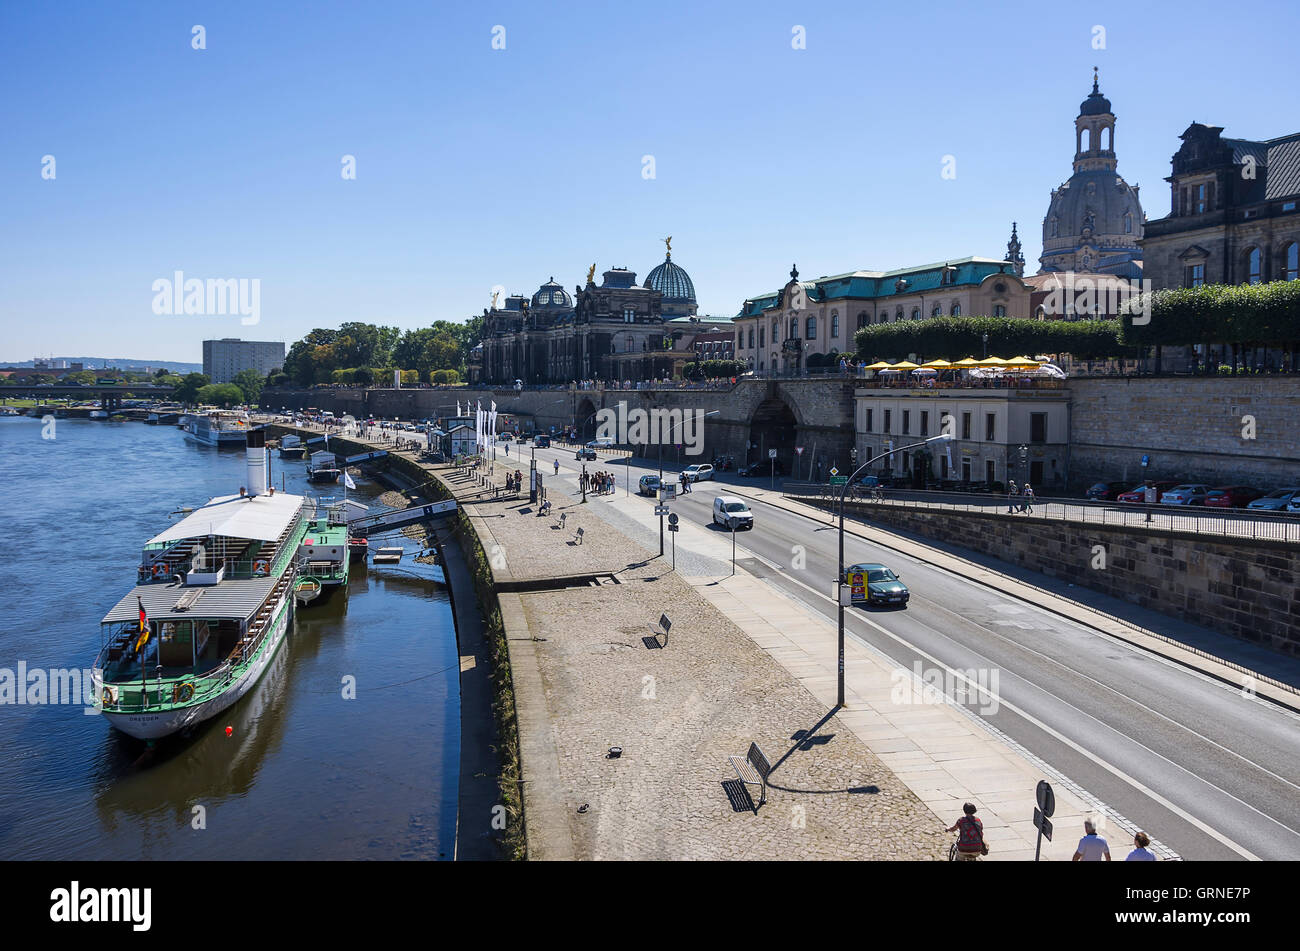 Historic Paddle Steamer And Bruhl's Terrace In Dresden, Saxony, Germany Stock Photo